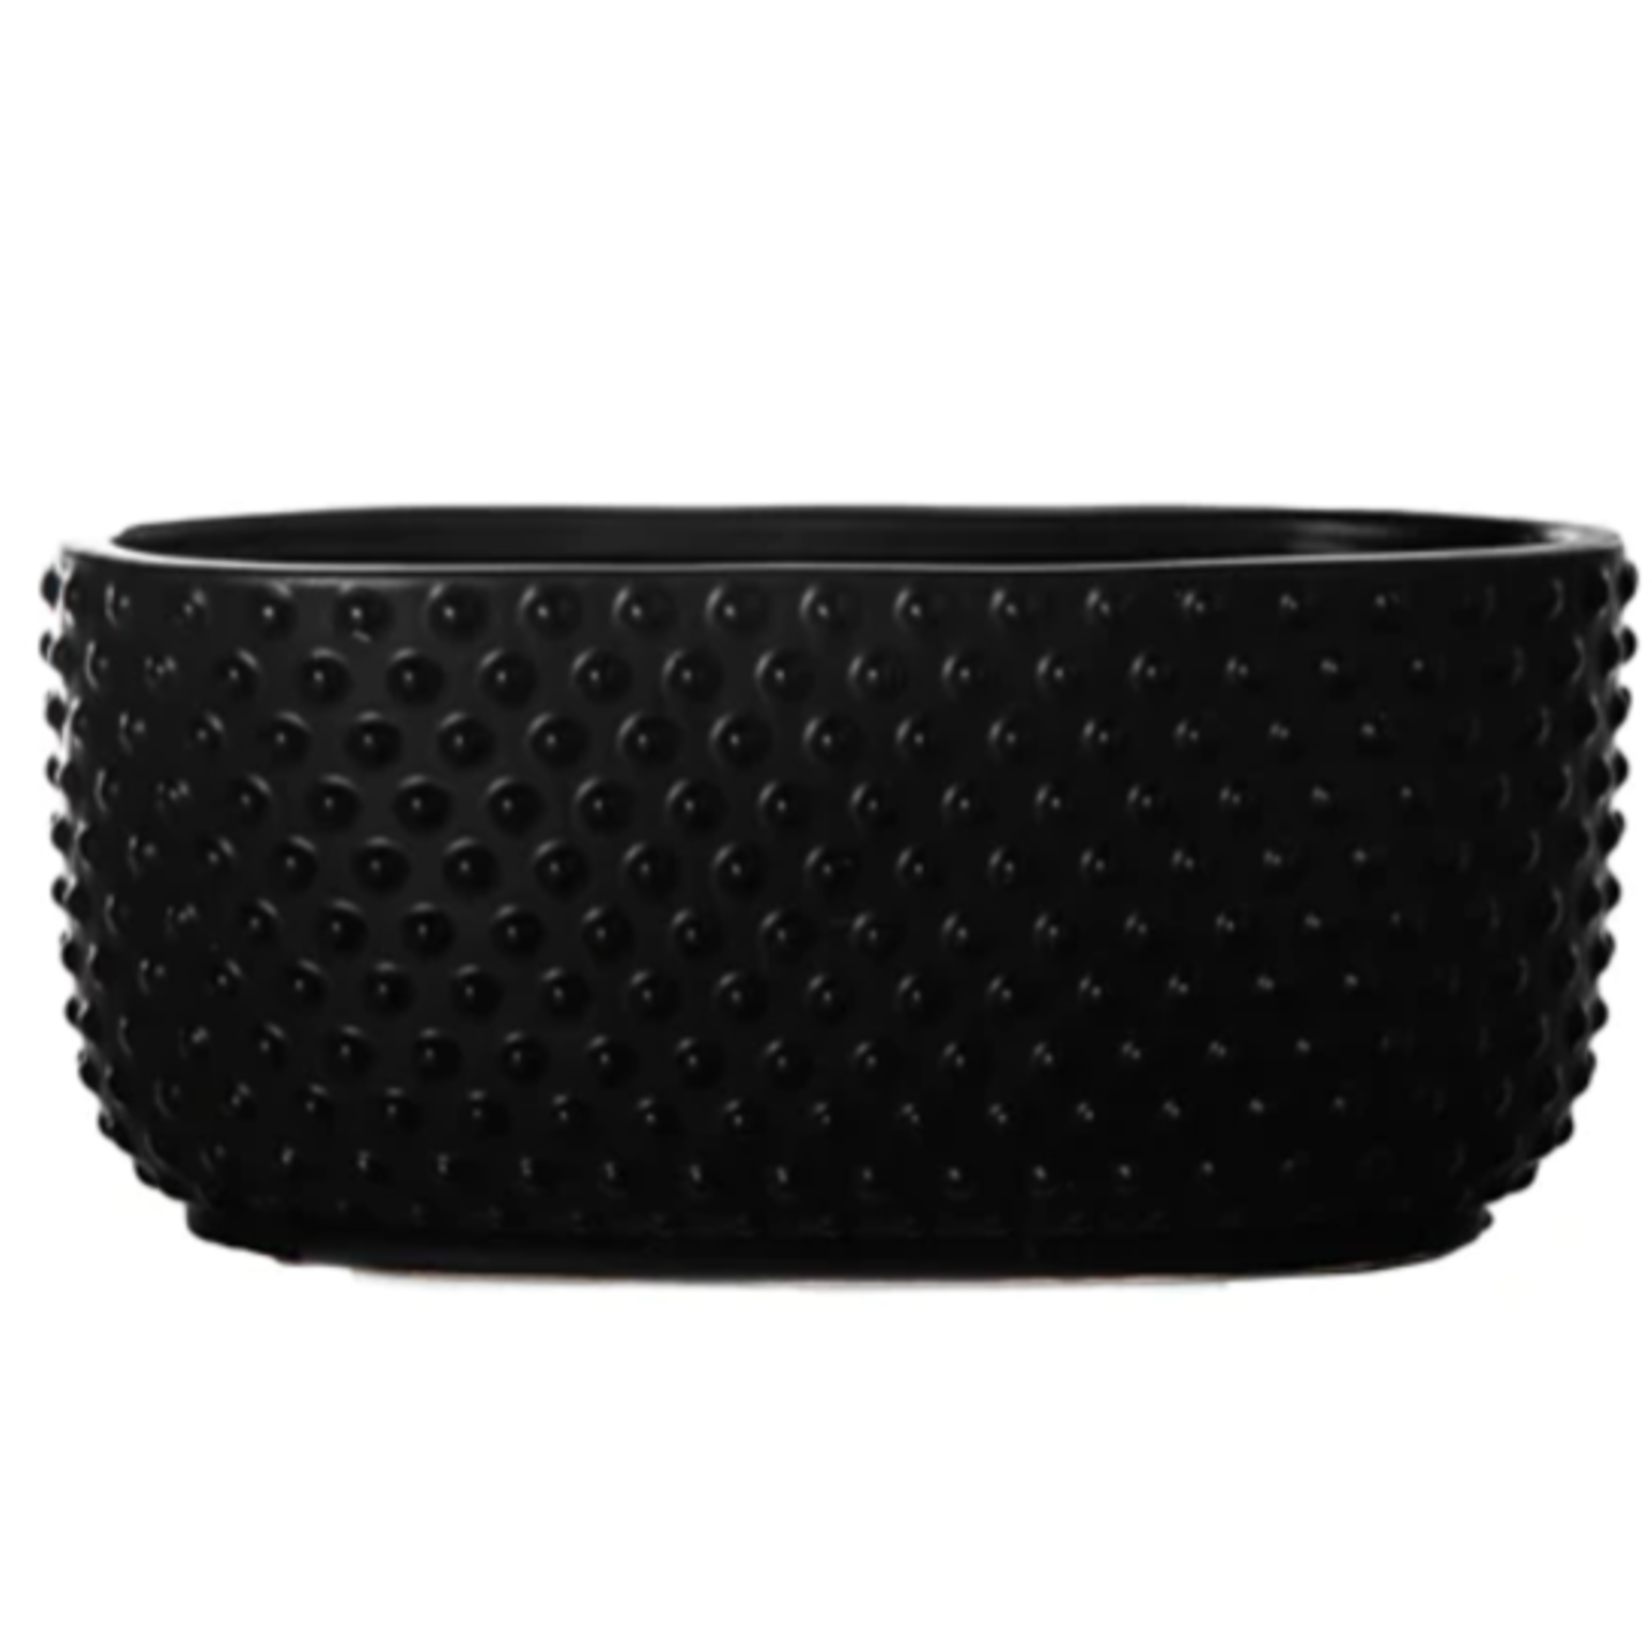 4.75"H X 5.5” X 10.25” MATTE BLACK Ceramic Low Oval Vase with Embossed Dotted Pattern Design Body